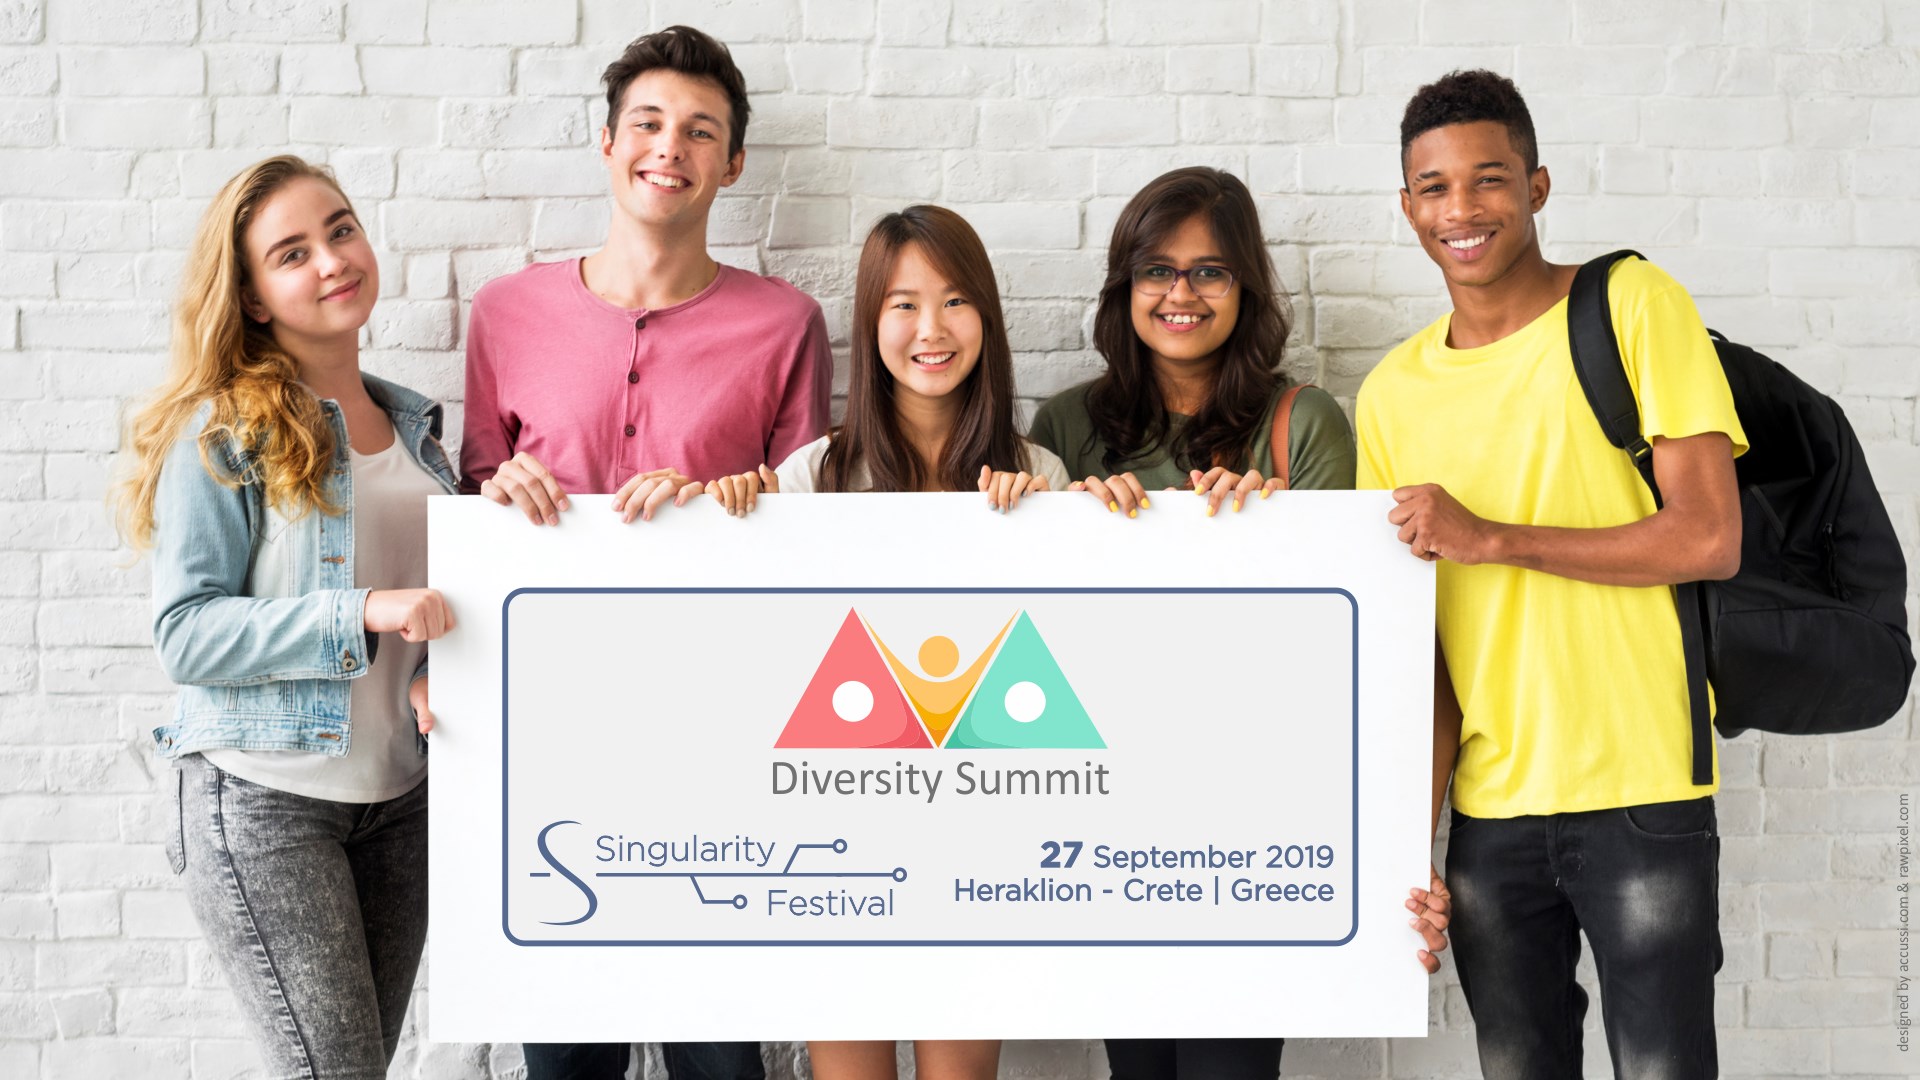 You are currently viewing Singularity Festival Week (SFW19) – Diversity Summit – Heraklion, Crete